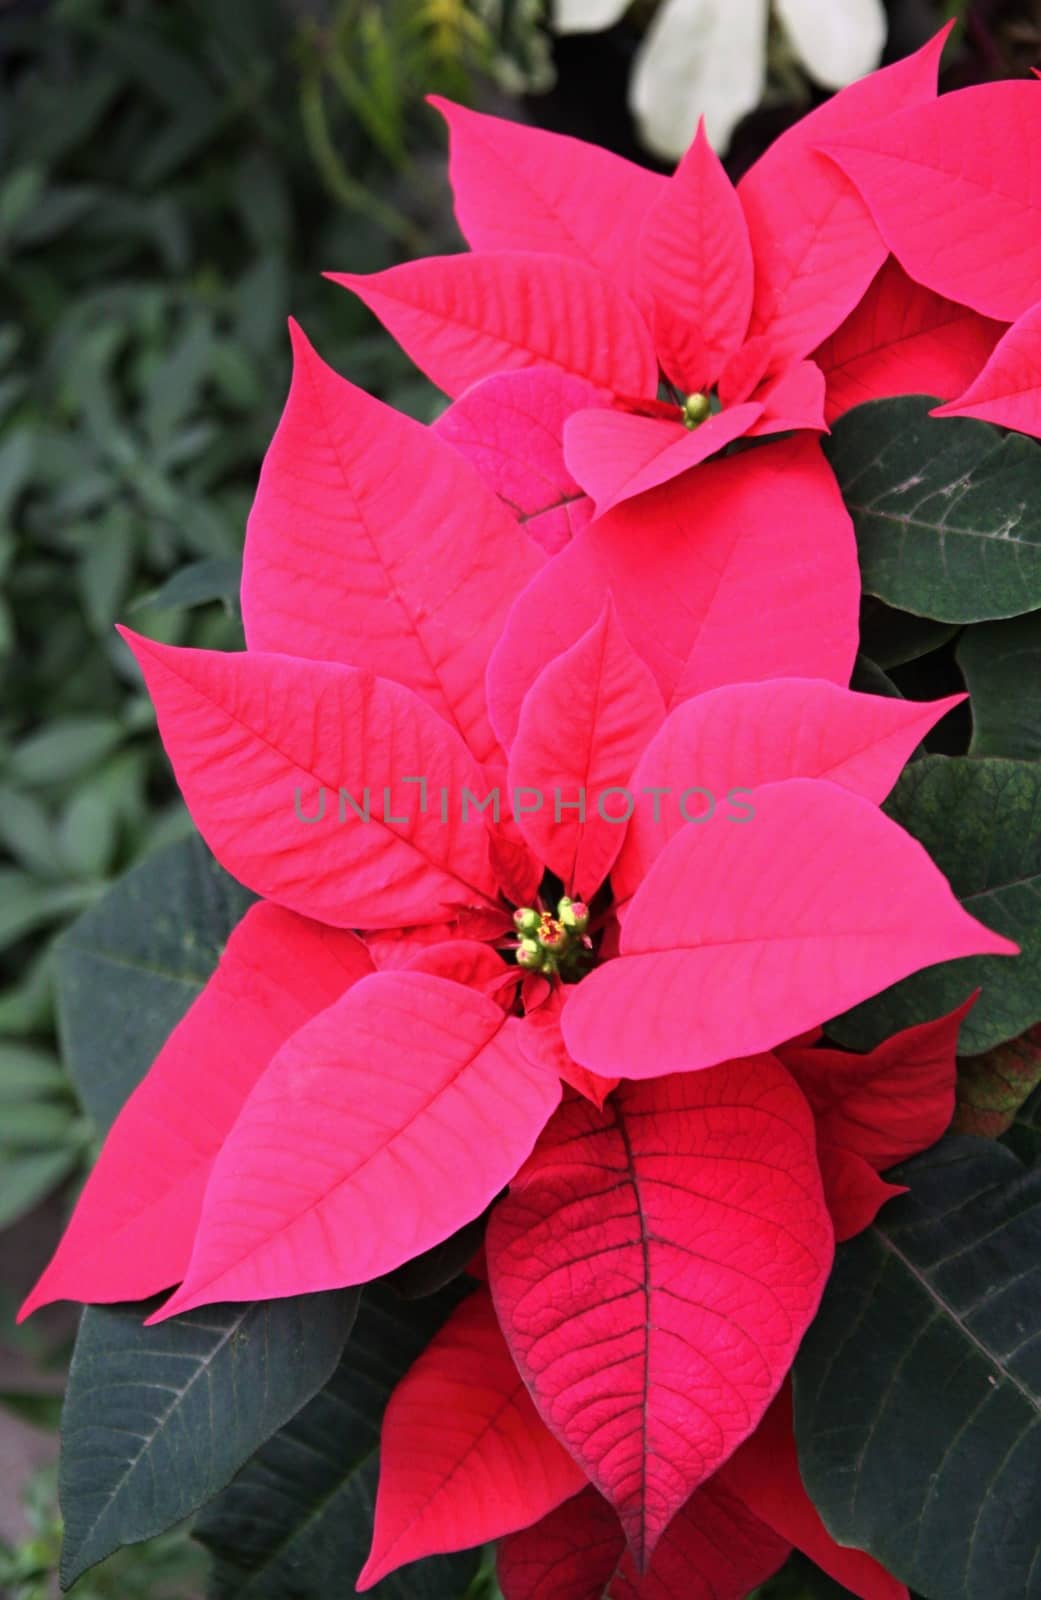 beautiful red poinsettia  by jnerad